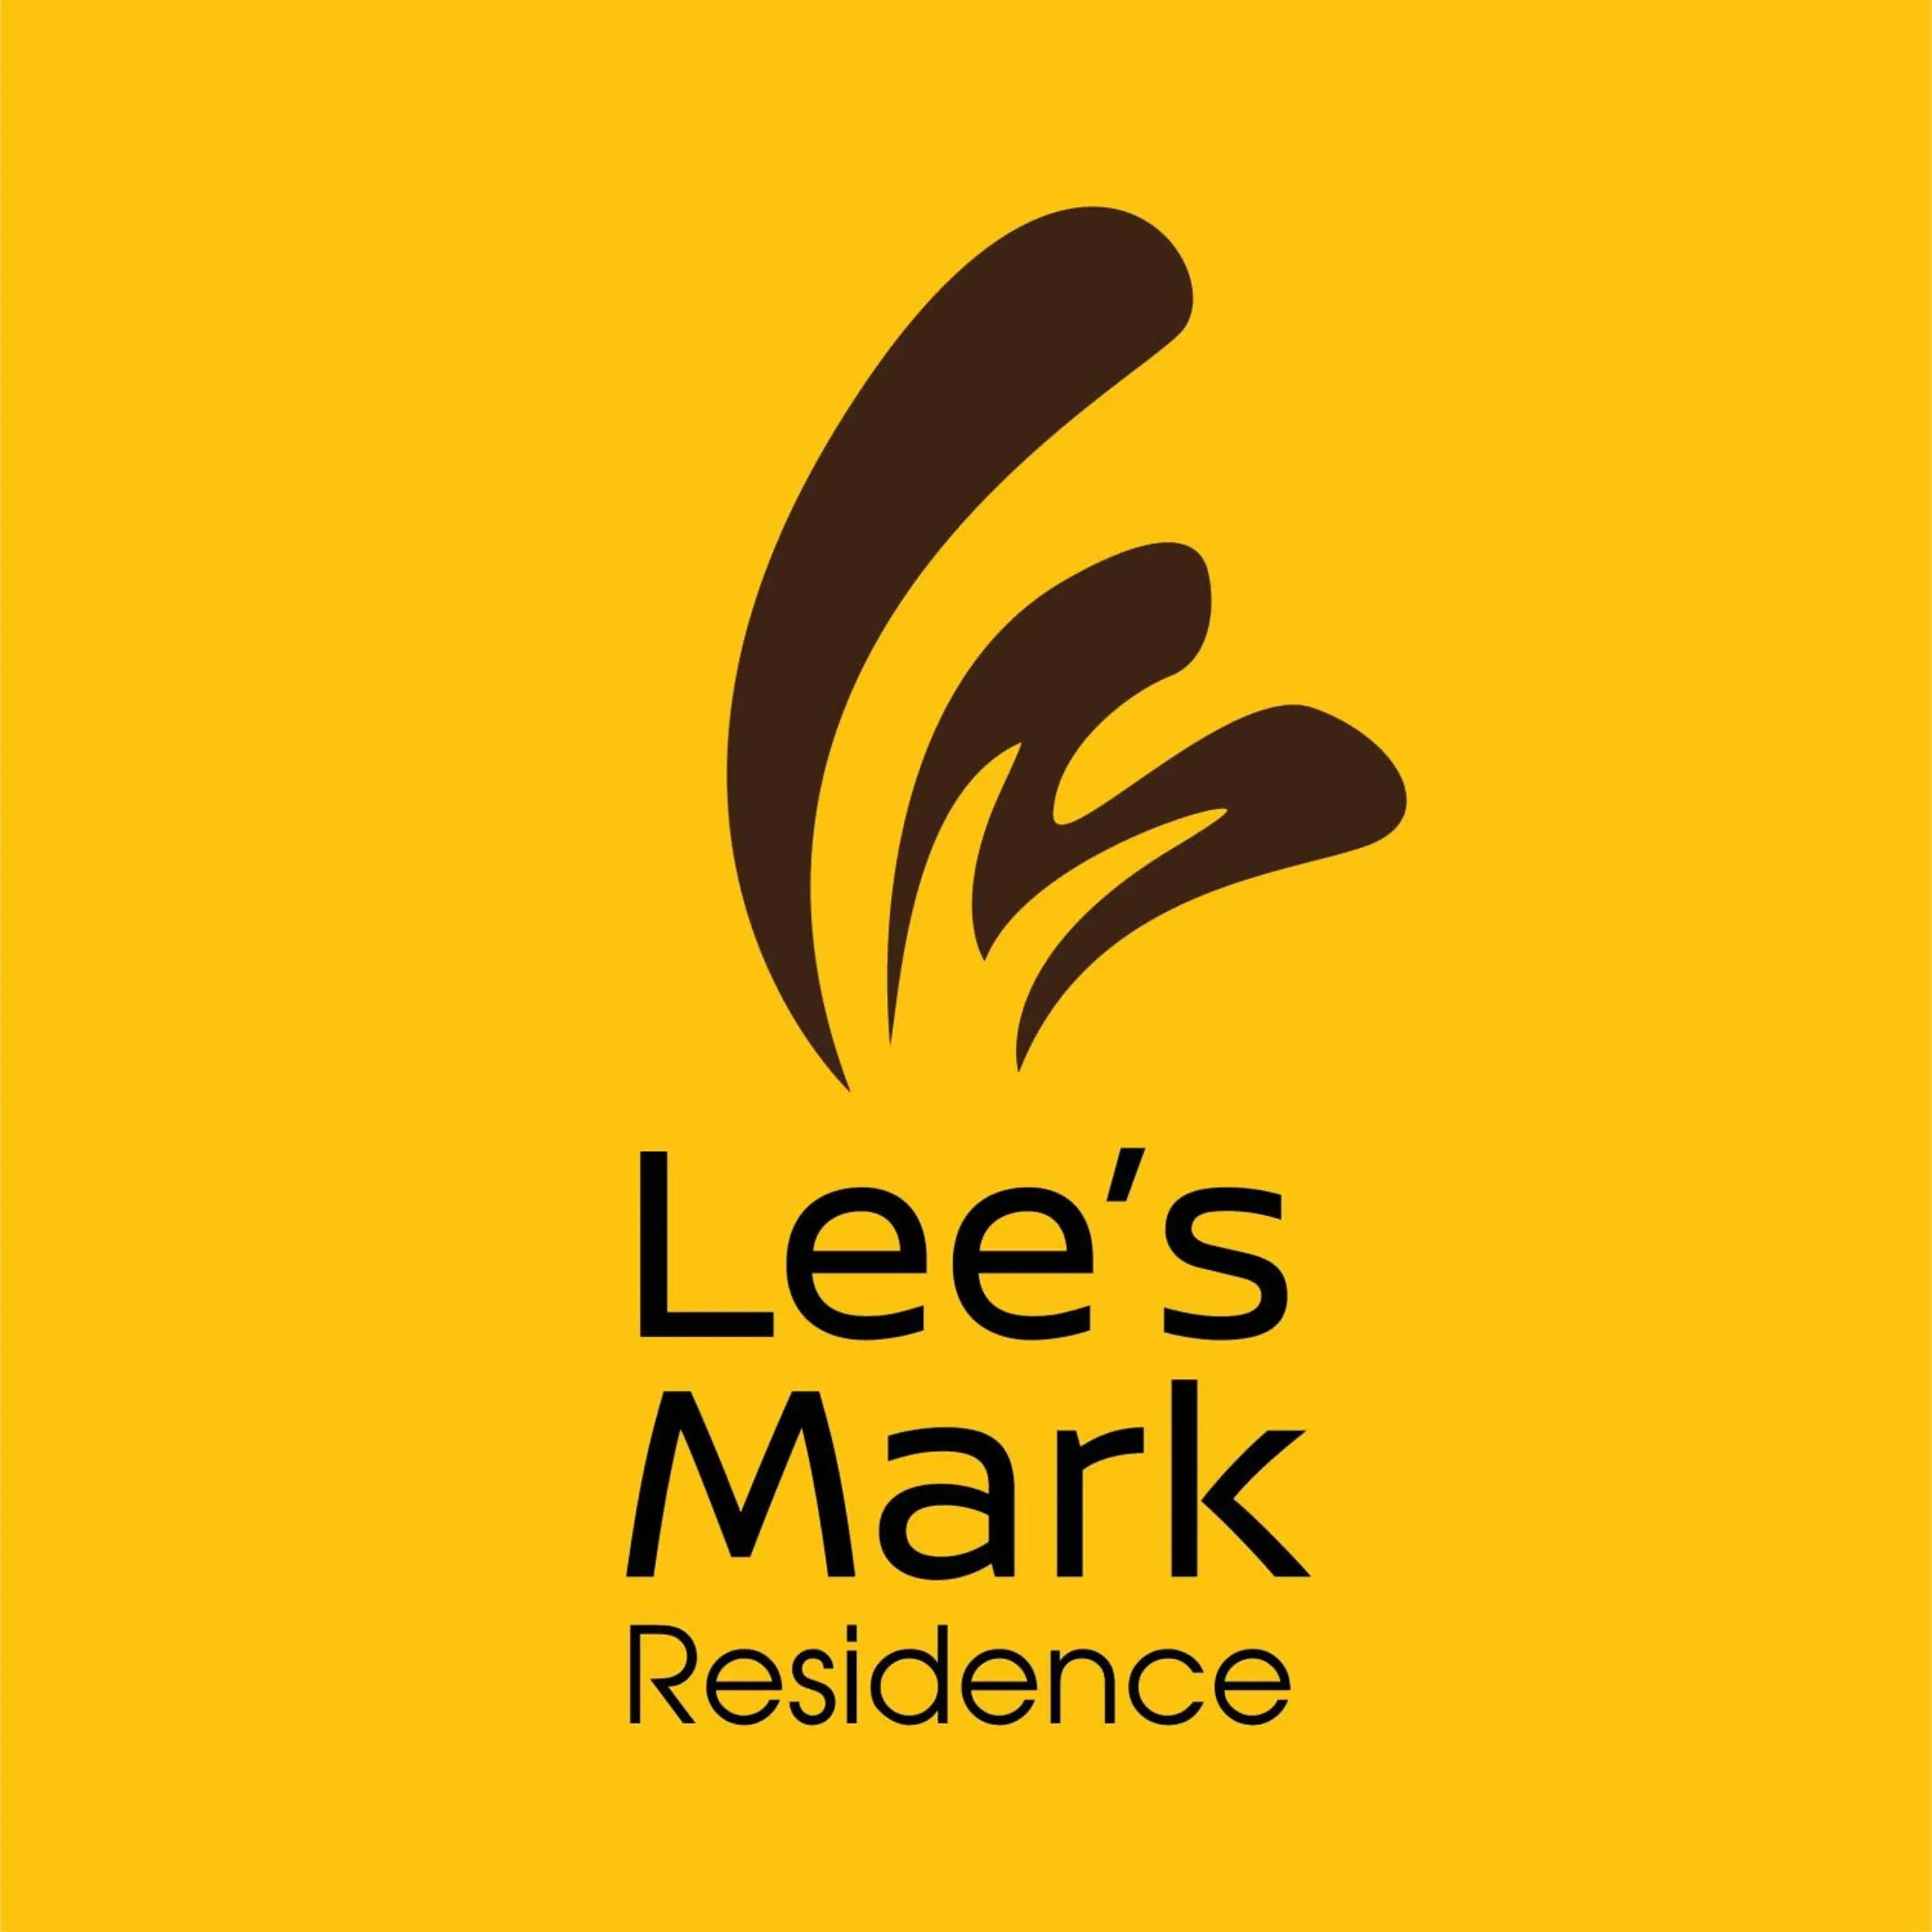 Property logo or sign in Lee's Mark Residence